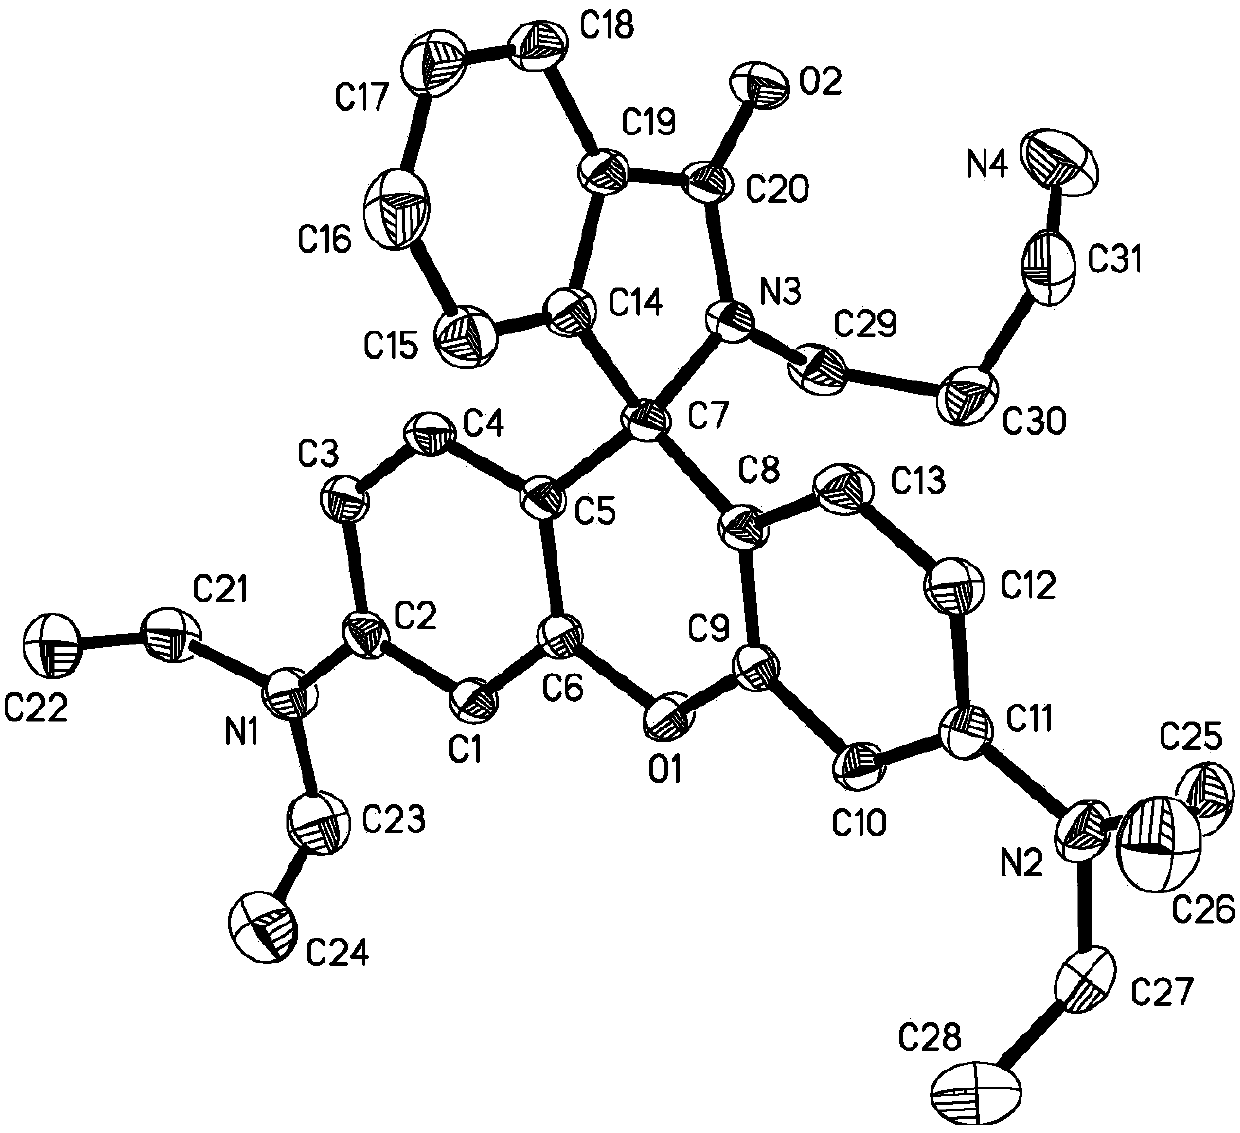 Rhodamine derivative and its application in detection of nitrite ions